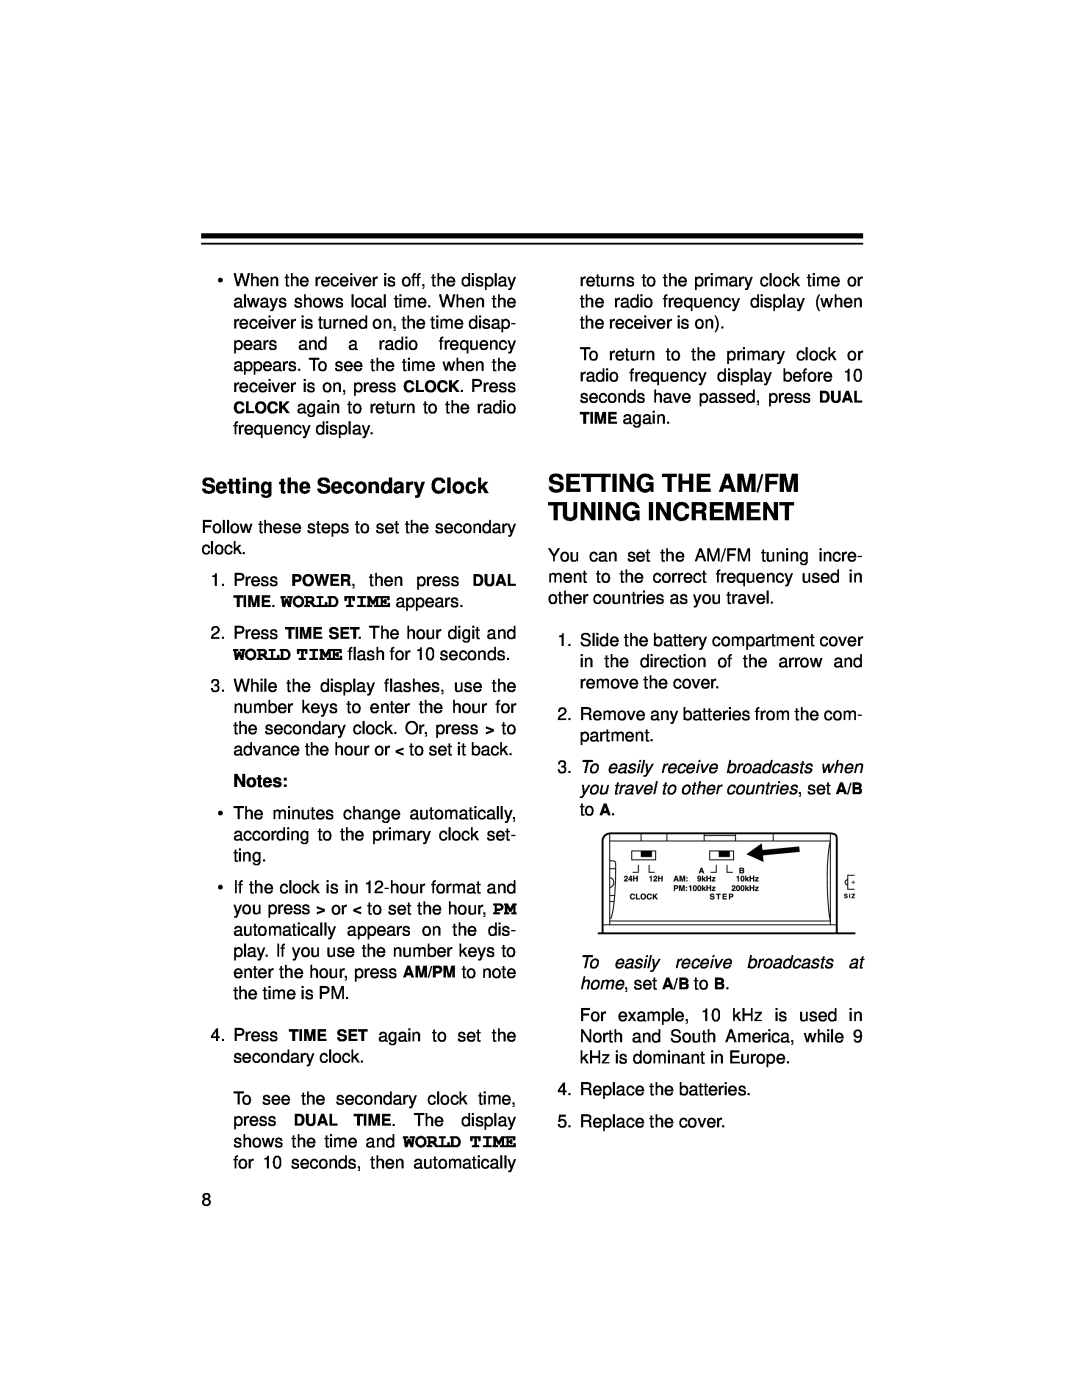 Radio Shack DX-396 owner manual Setting the Secondary Clock, Setting The Am/Fm Tuning Increment 